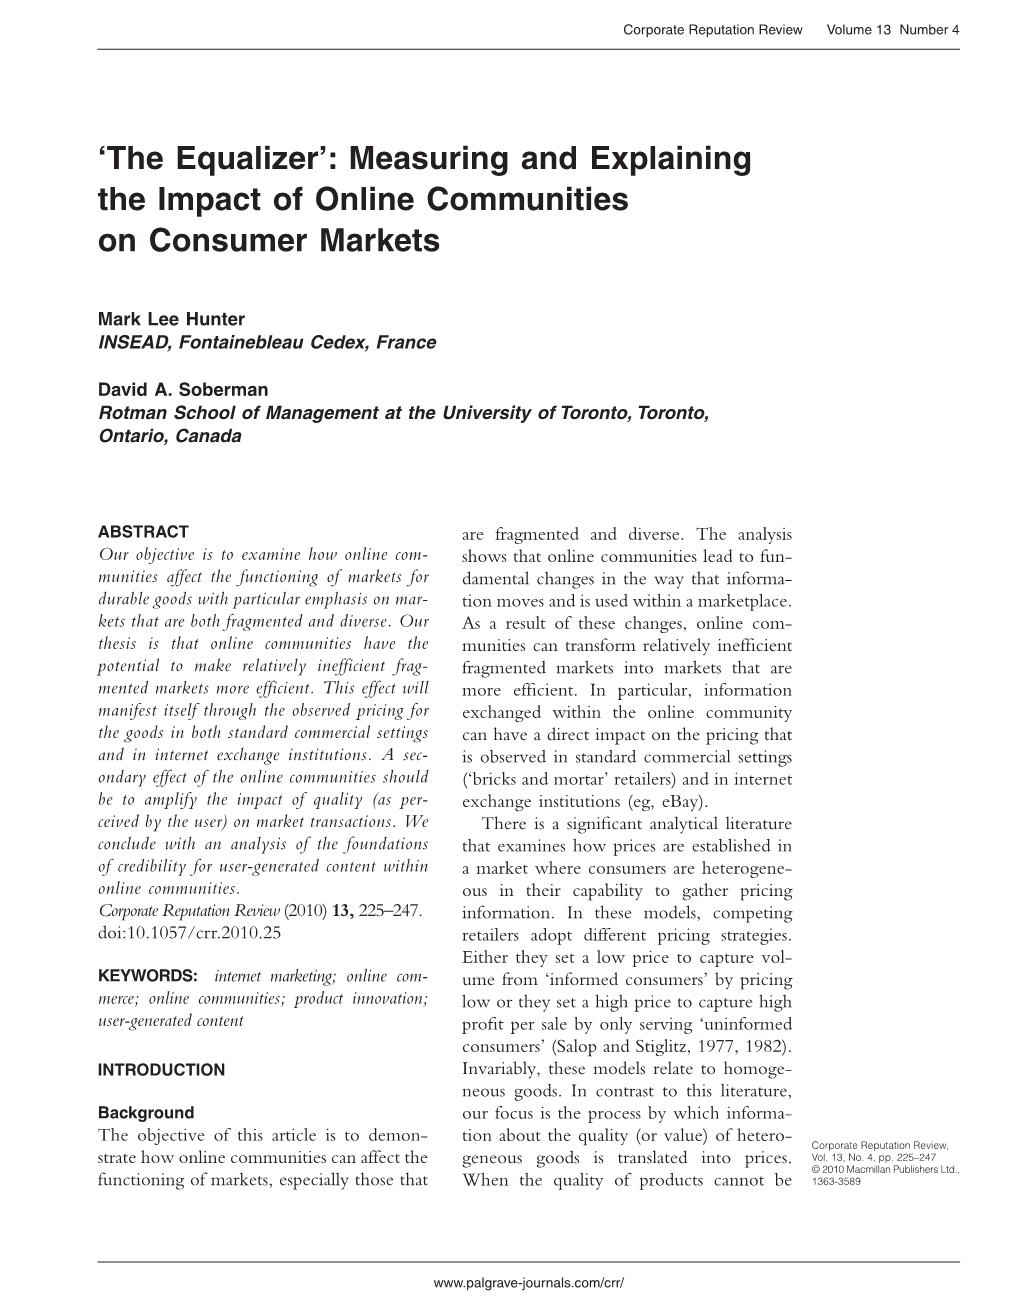 Measuring and Explaining the Impact of Online Communities on Consumer Markets